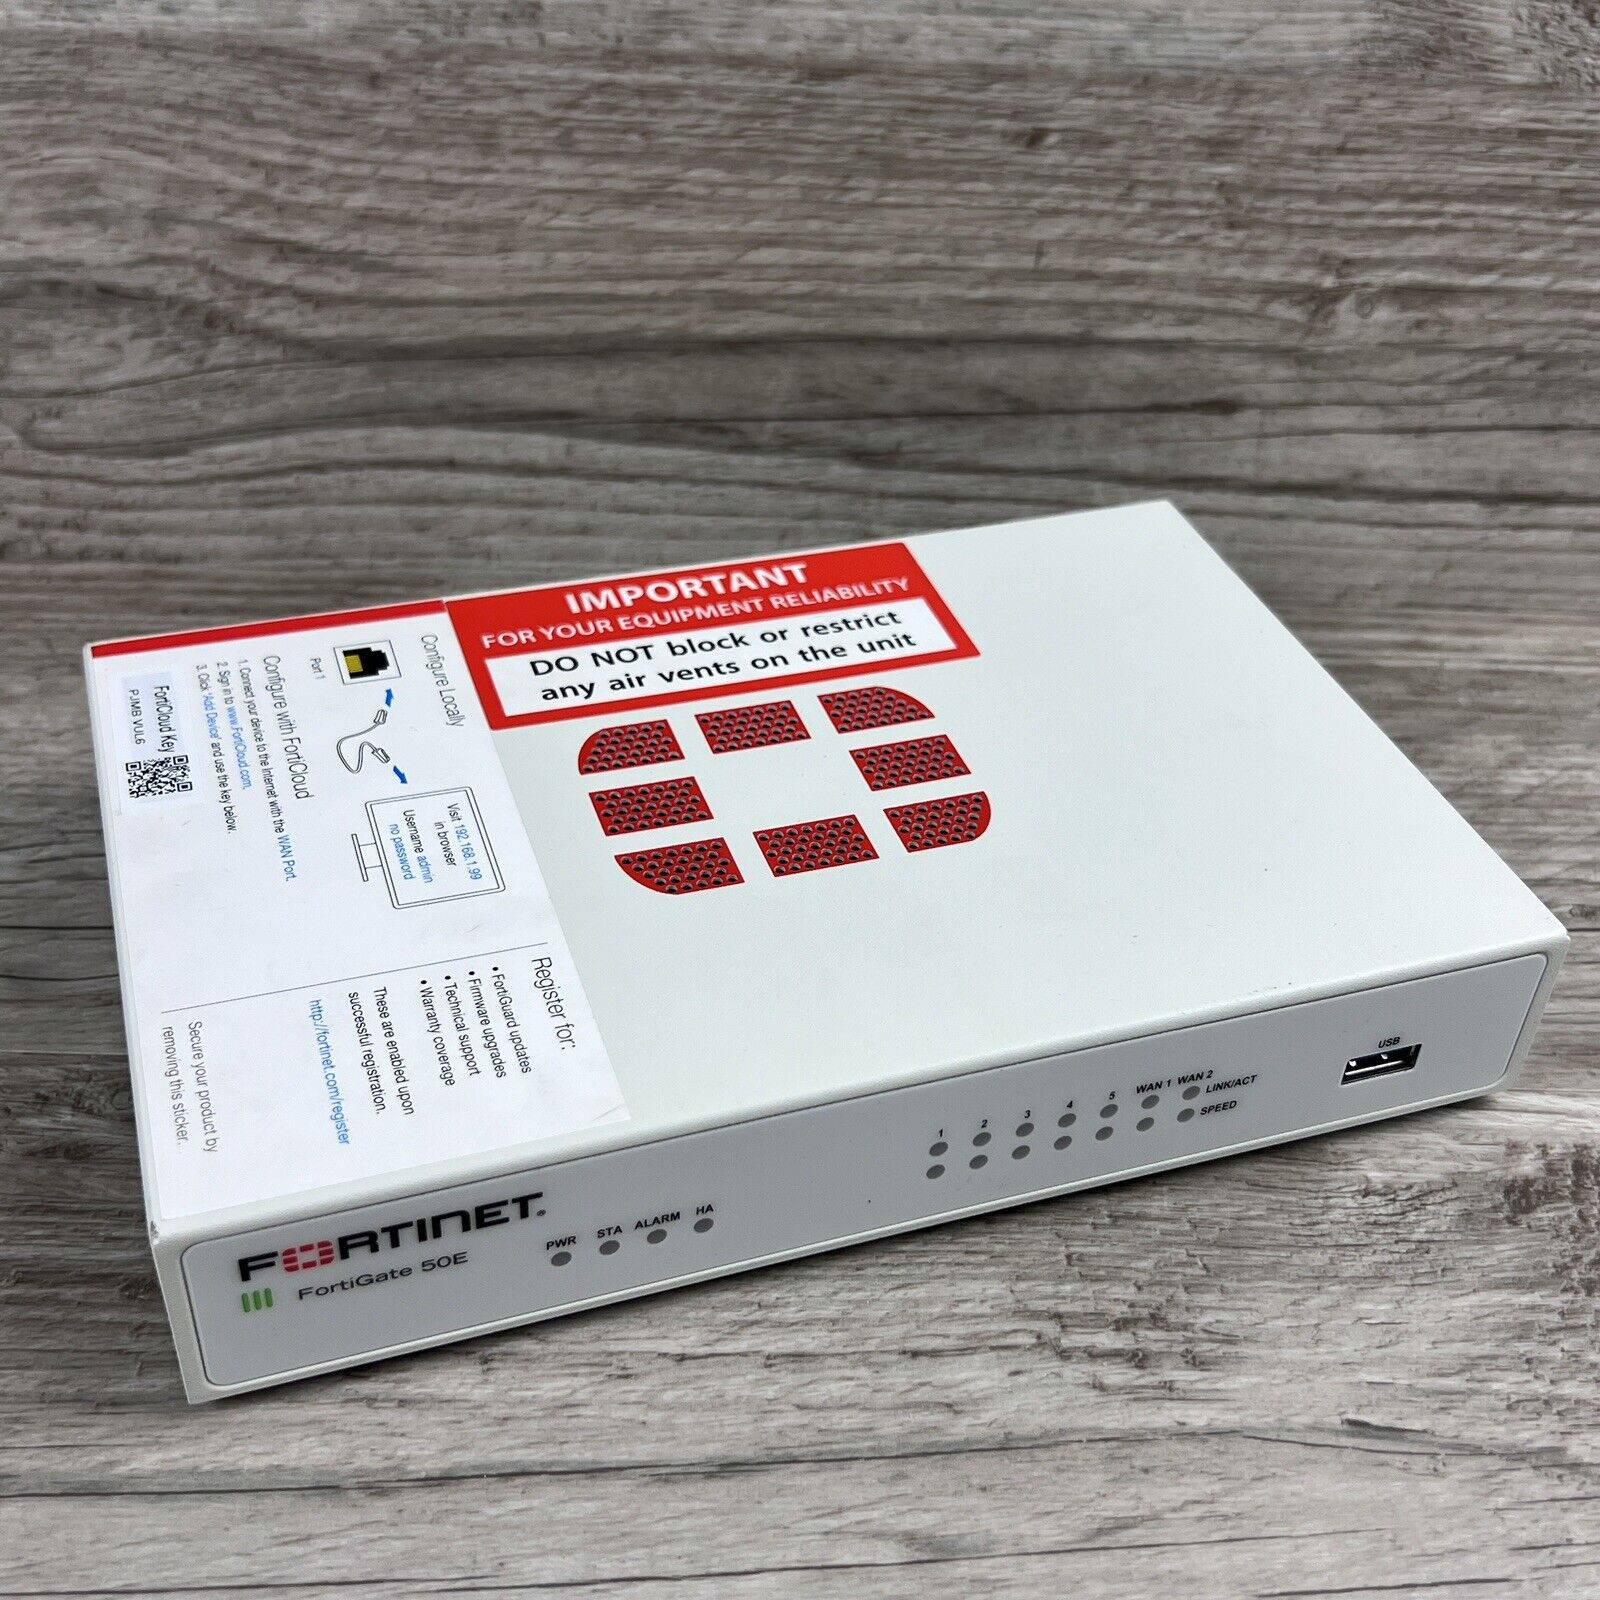 Fortinet Fortigate-50E FG-50E Network Security Firewall Initialized